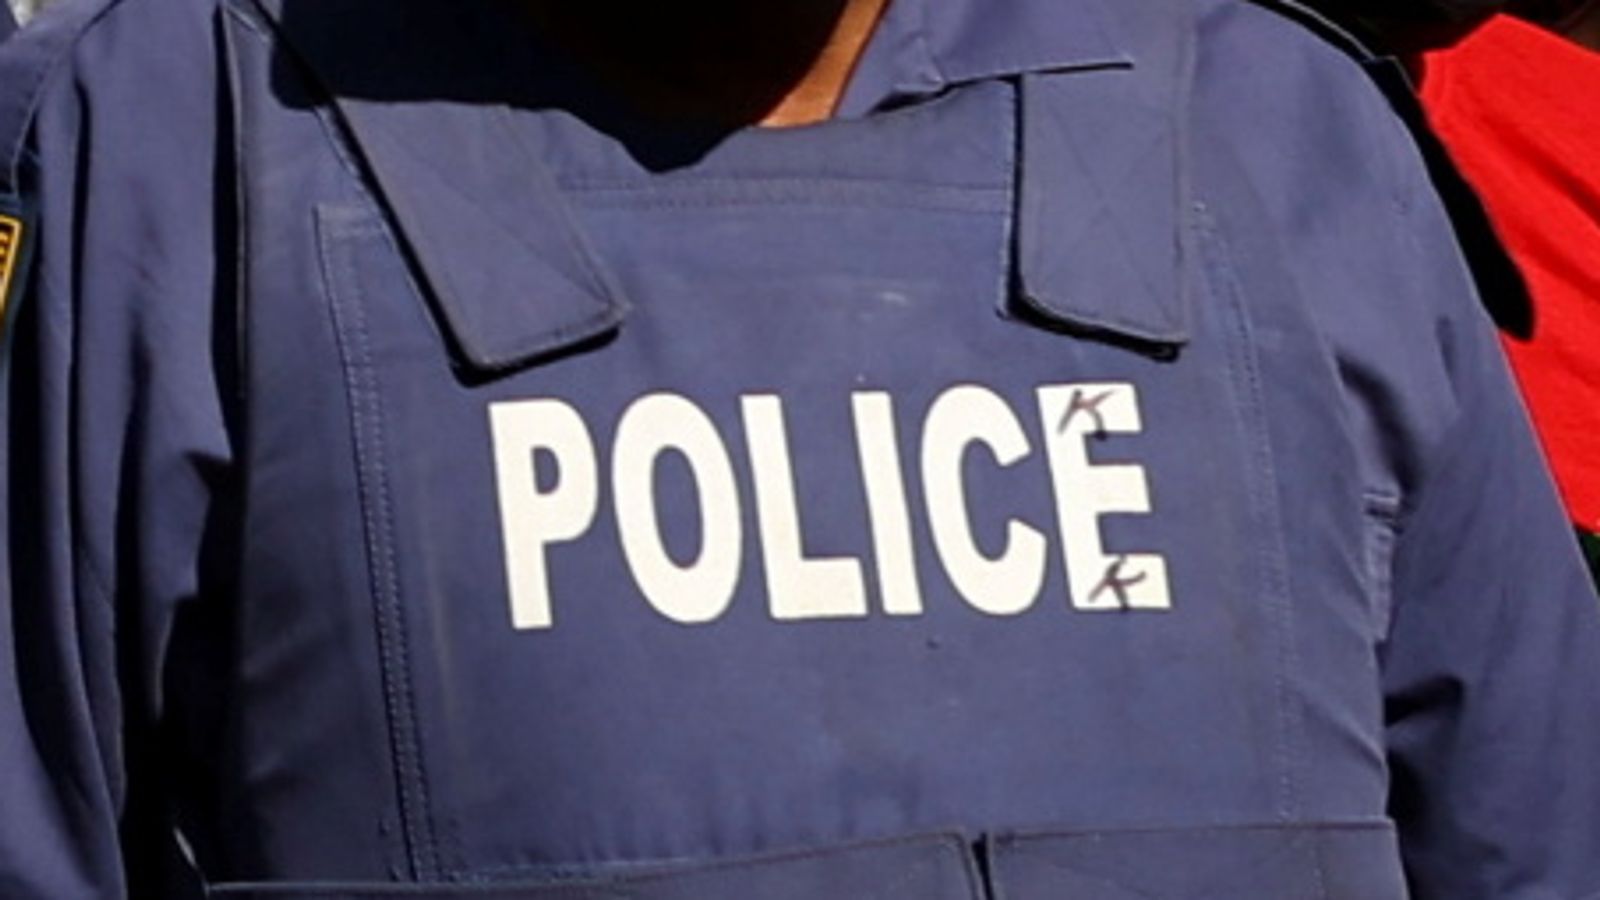 South Africa: Eight people shot dead in 'callous and cold-blooded' attack on birthday party